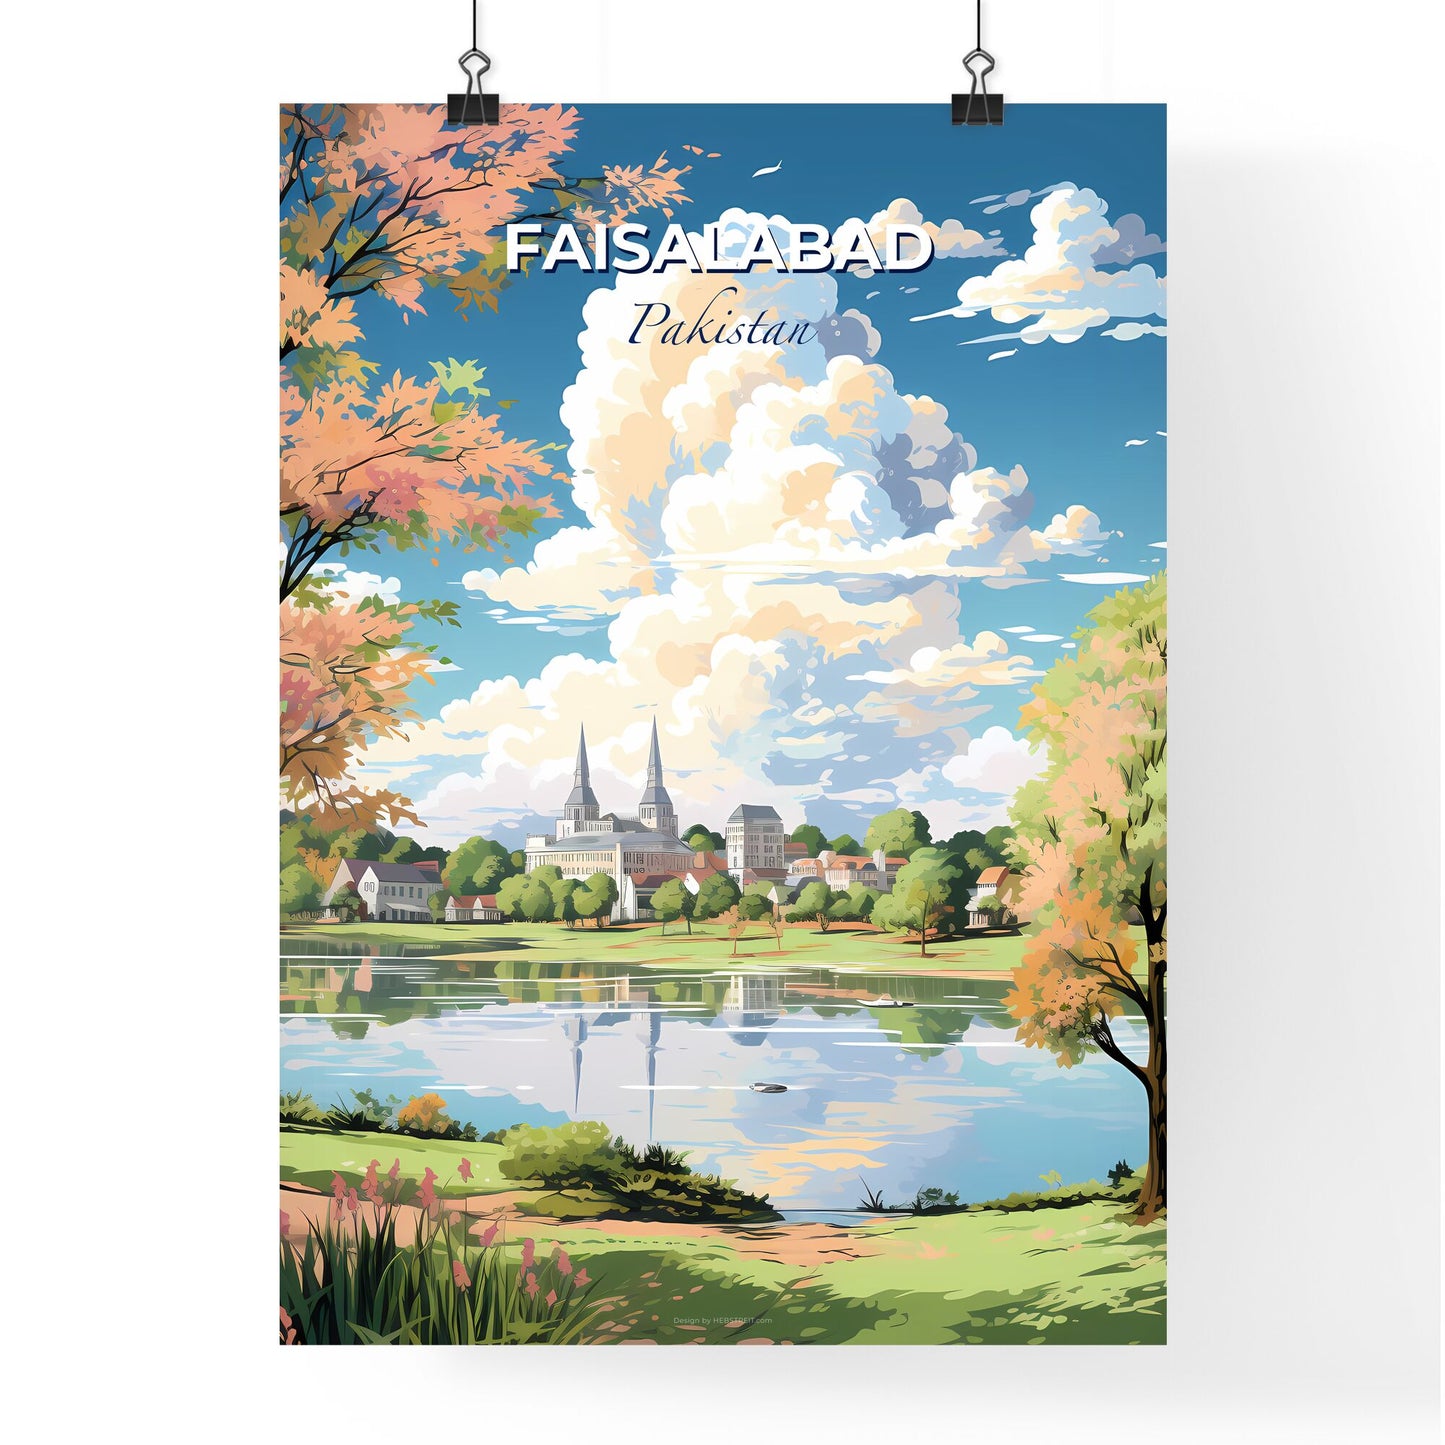 Faisalabad Pakistan Skyline - A Landscape Of A Lake With Trees And Buildings - Customizable Travel Gift Default Title